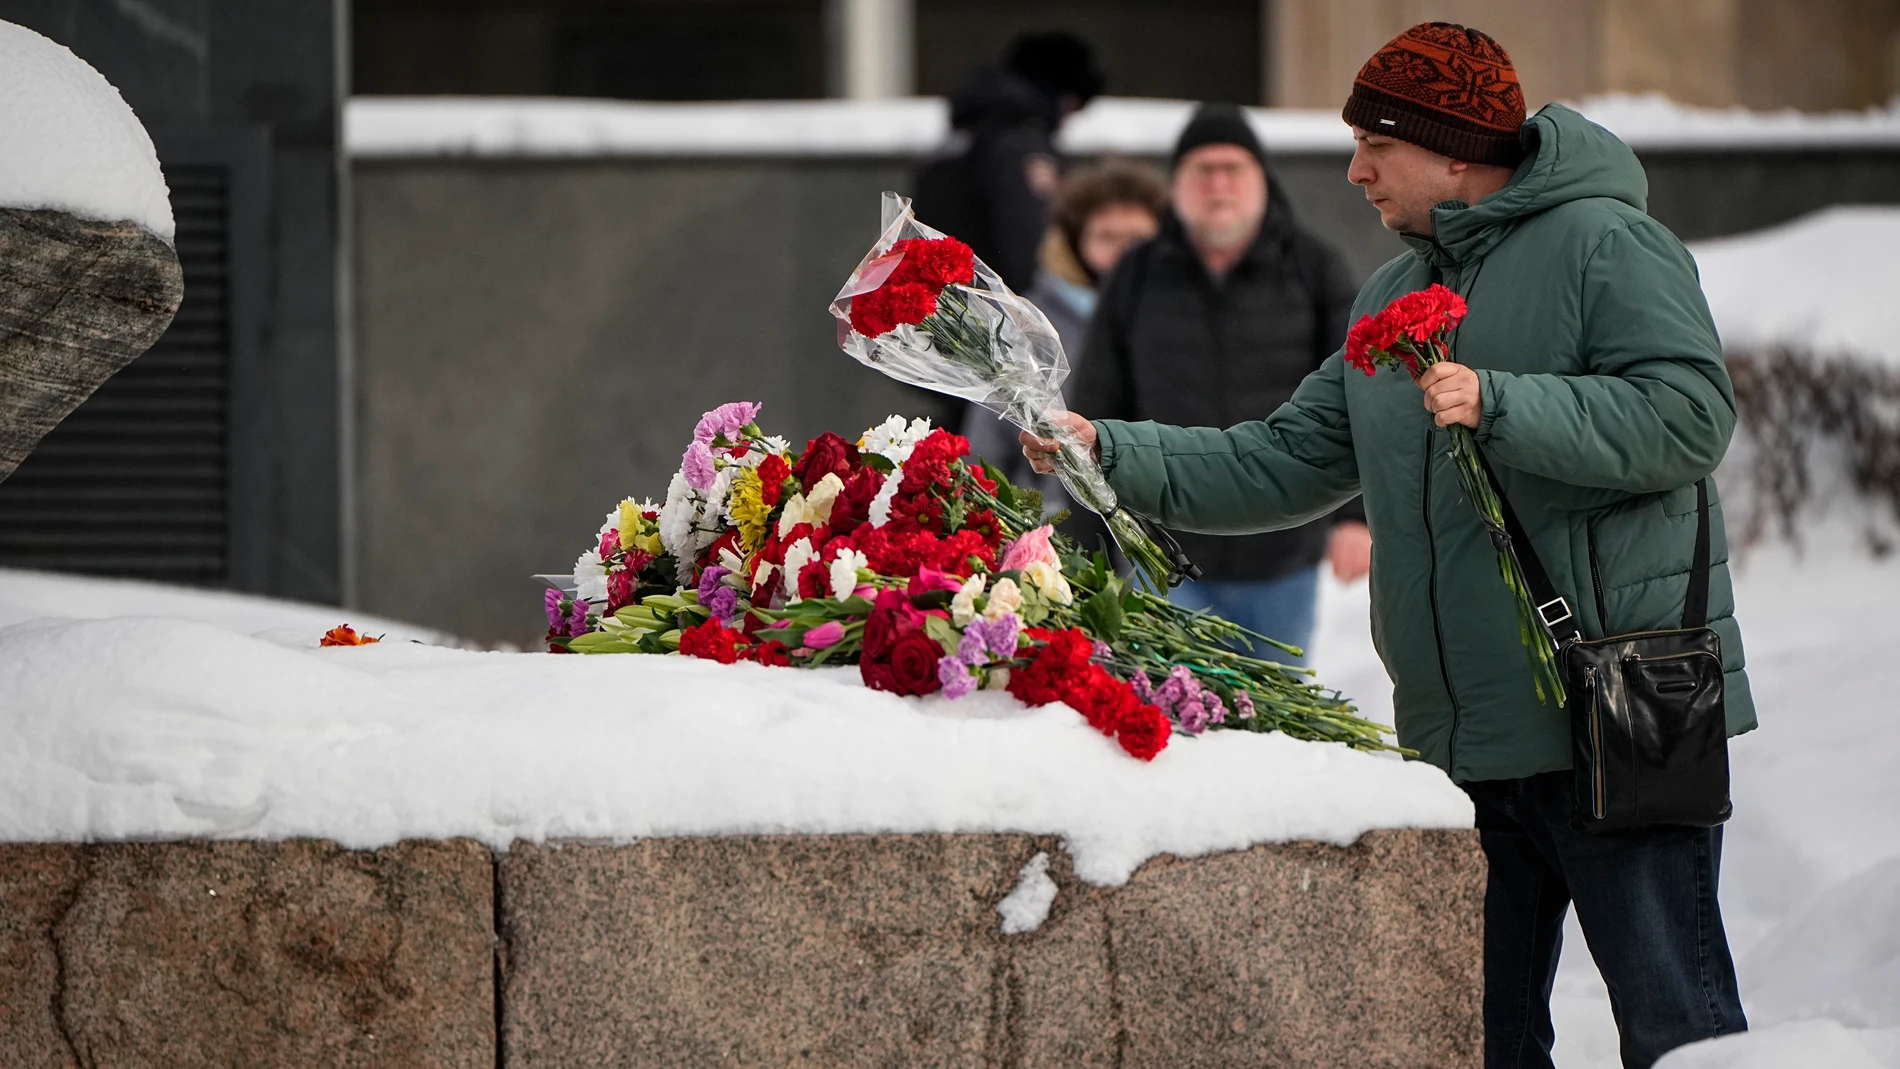 A man lays flowers to pay the last respect to Alexei Navalny at the monument, a large boulder from the Solovetsky islands, where the first camp of the Gulag political prison system was established, near the historical the Federal Security Service (FSB, Soviet KGB successor) building in Moscow, Russia, on Sunday, Feb. 18, 2024. Russians across the vast country streamed to ad-hoc memorials with flowers and candles to pay tribute to Alexei Navalny, the most famous Russian opposition leader and t...